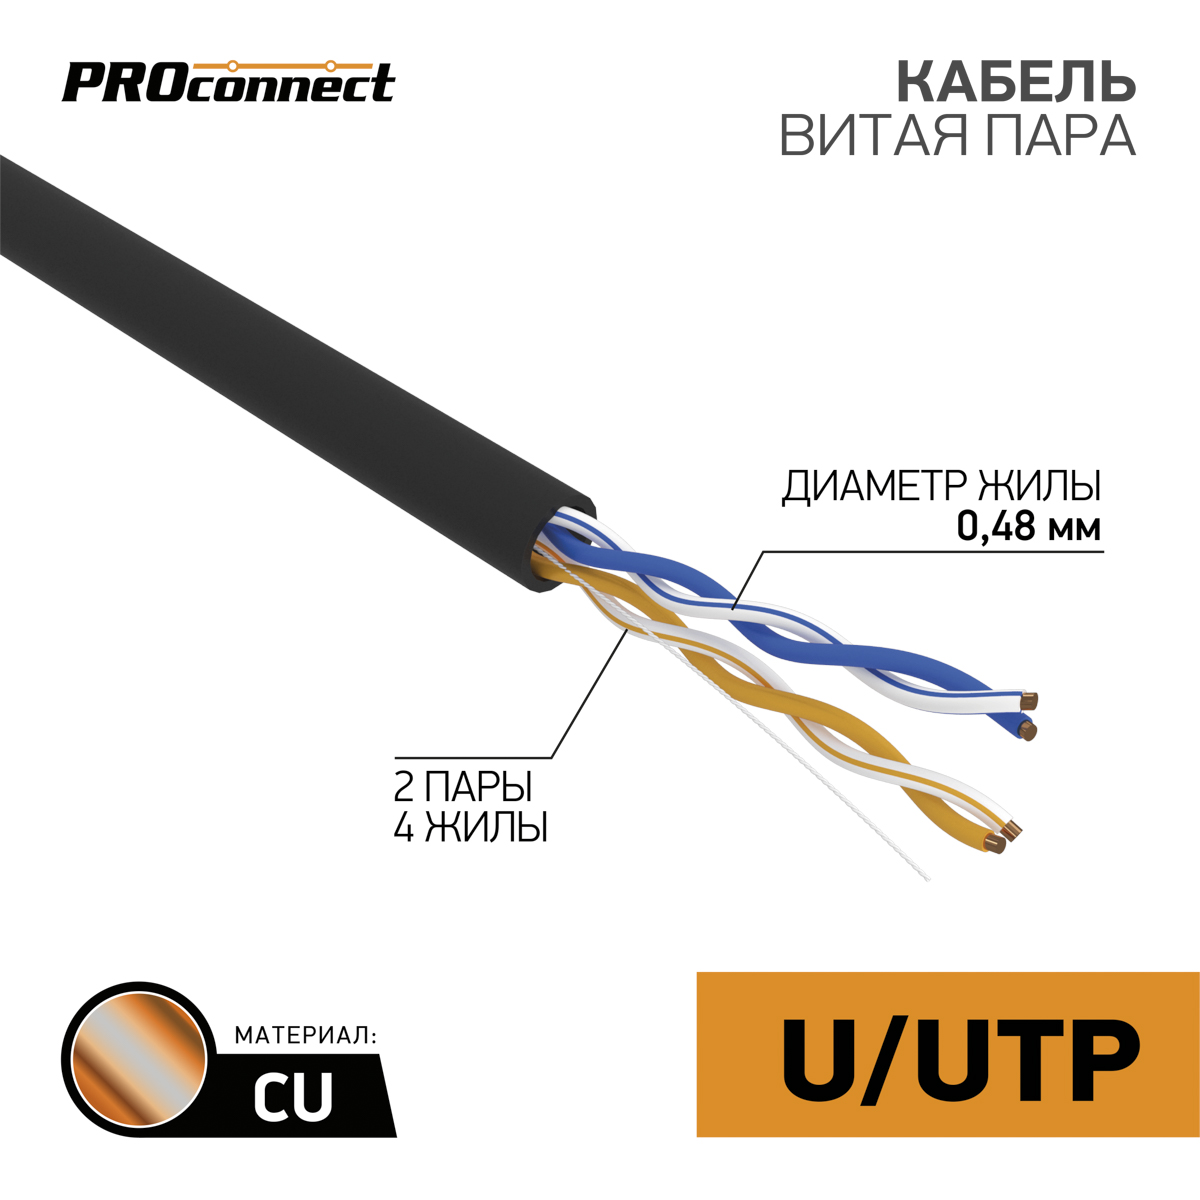 Кабель UTP 4 х 2 x 0,48 мм, cat 5e, наружный (OUTDOOR)  PROCONNECT 